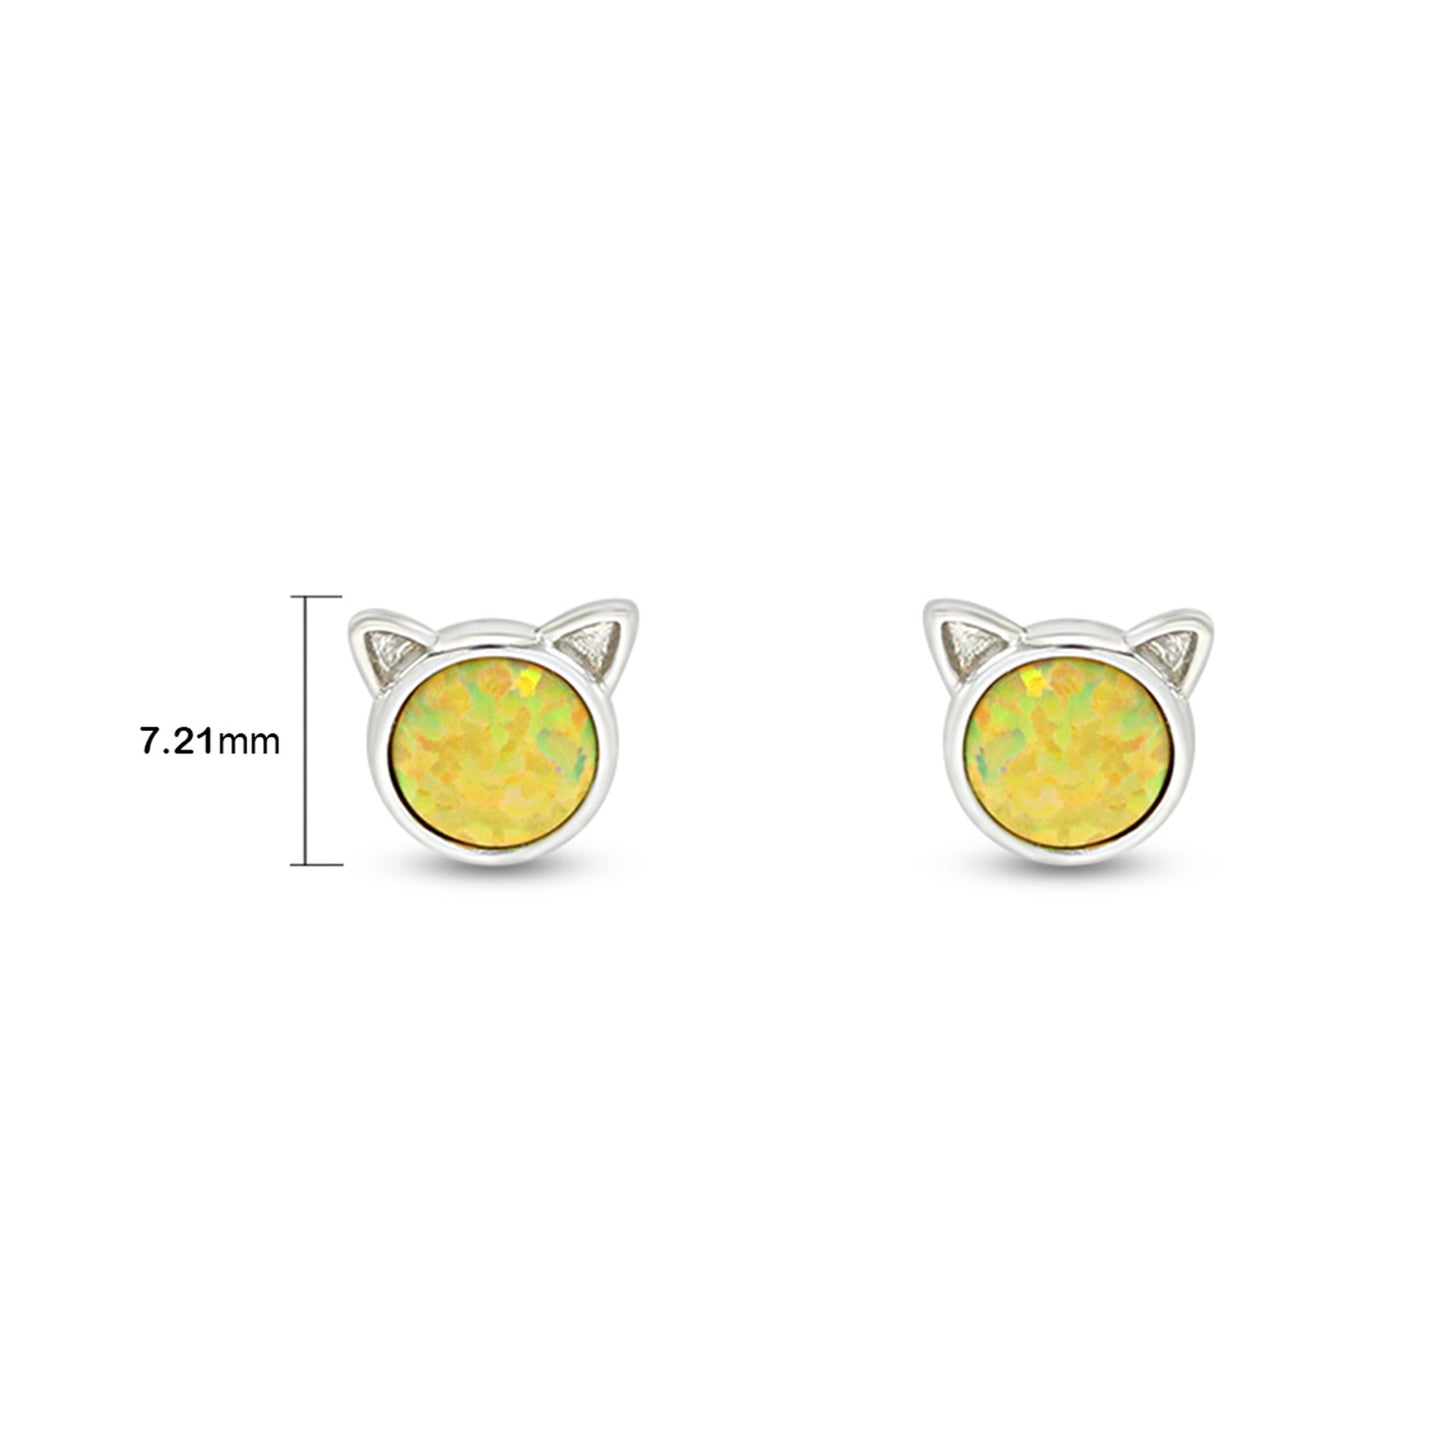 Load image into Gallery viewer, Round Synthetic Opal Cat Stud Earrings/Animal Stud Earrings For Women In 14K White Gold Over Sterling Silver
